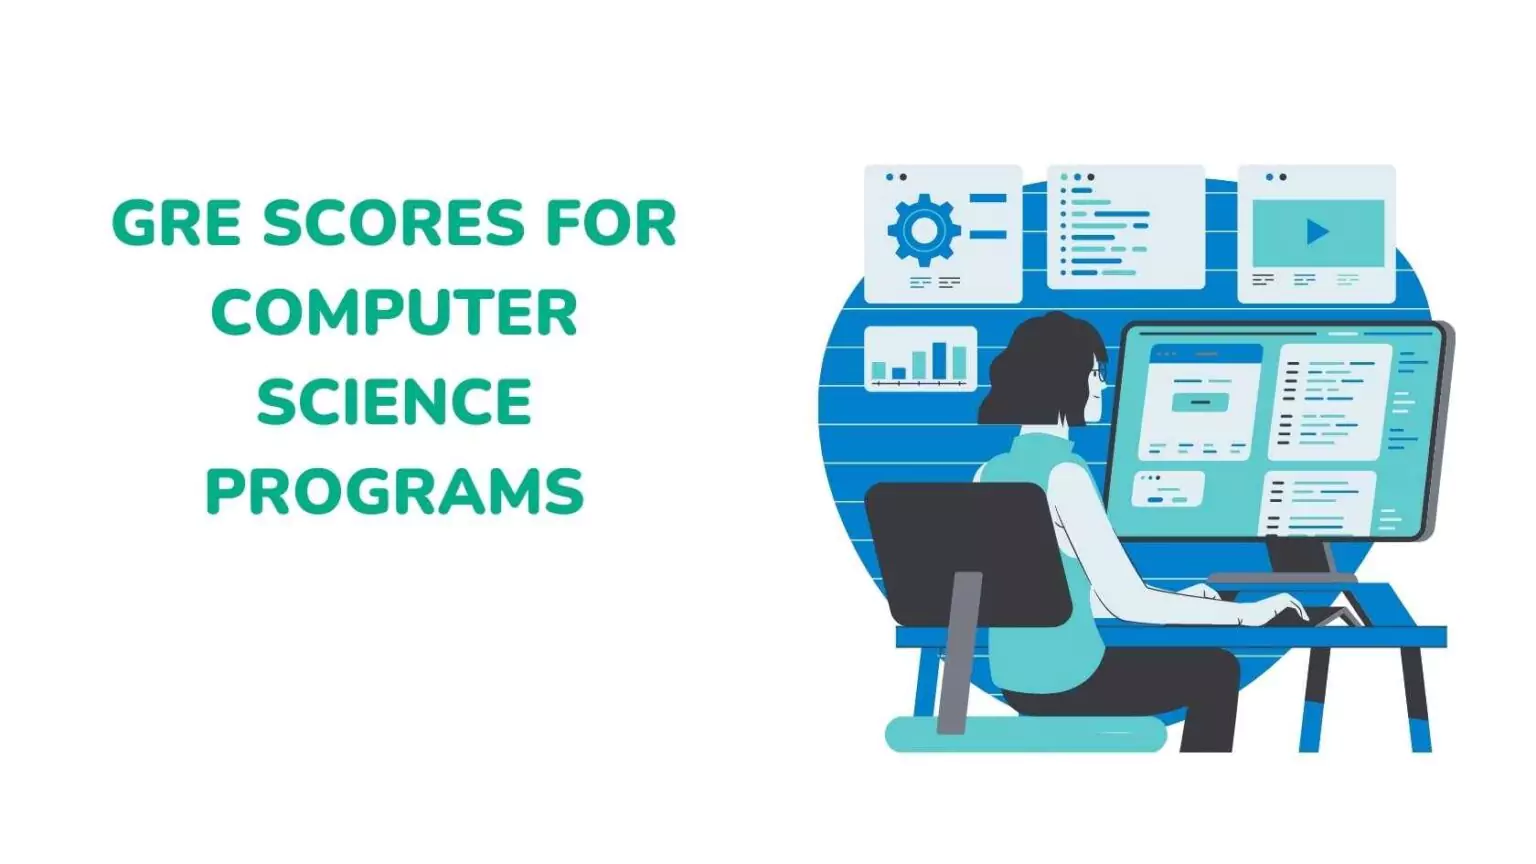 GRE Scores for Computer Science Programs